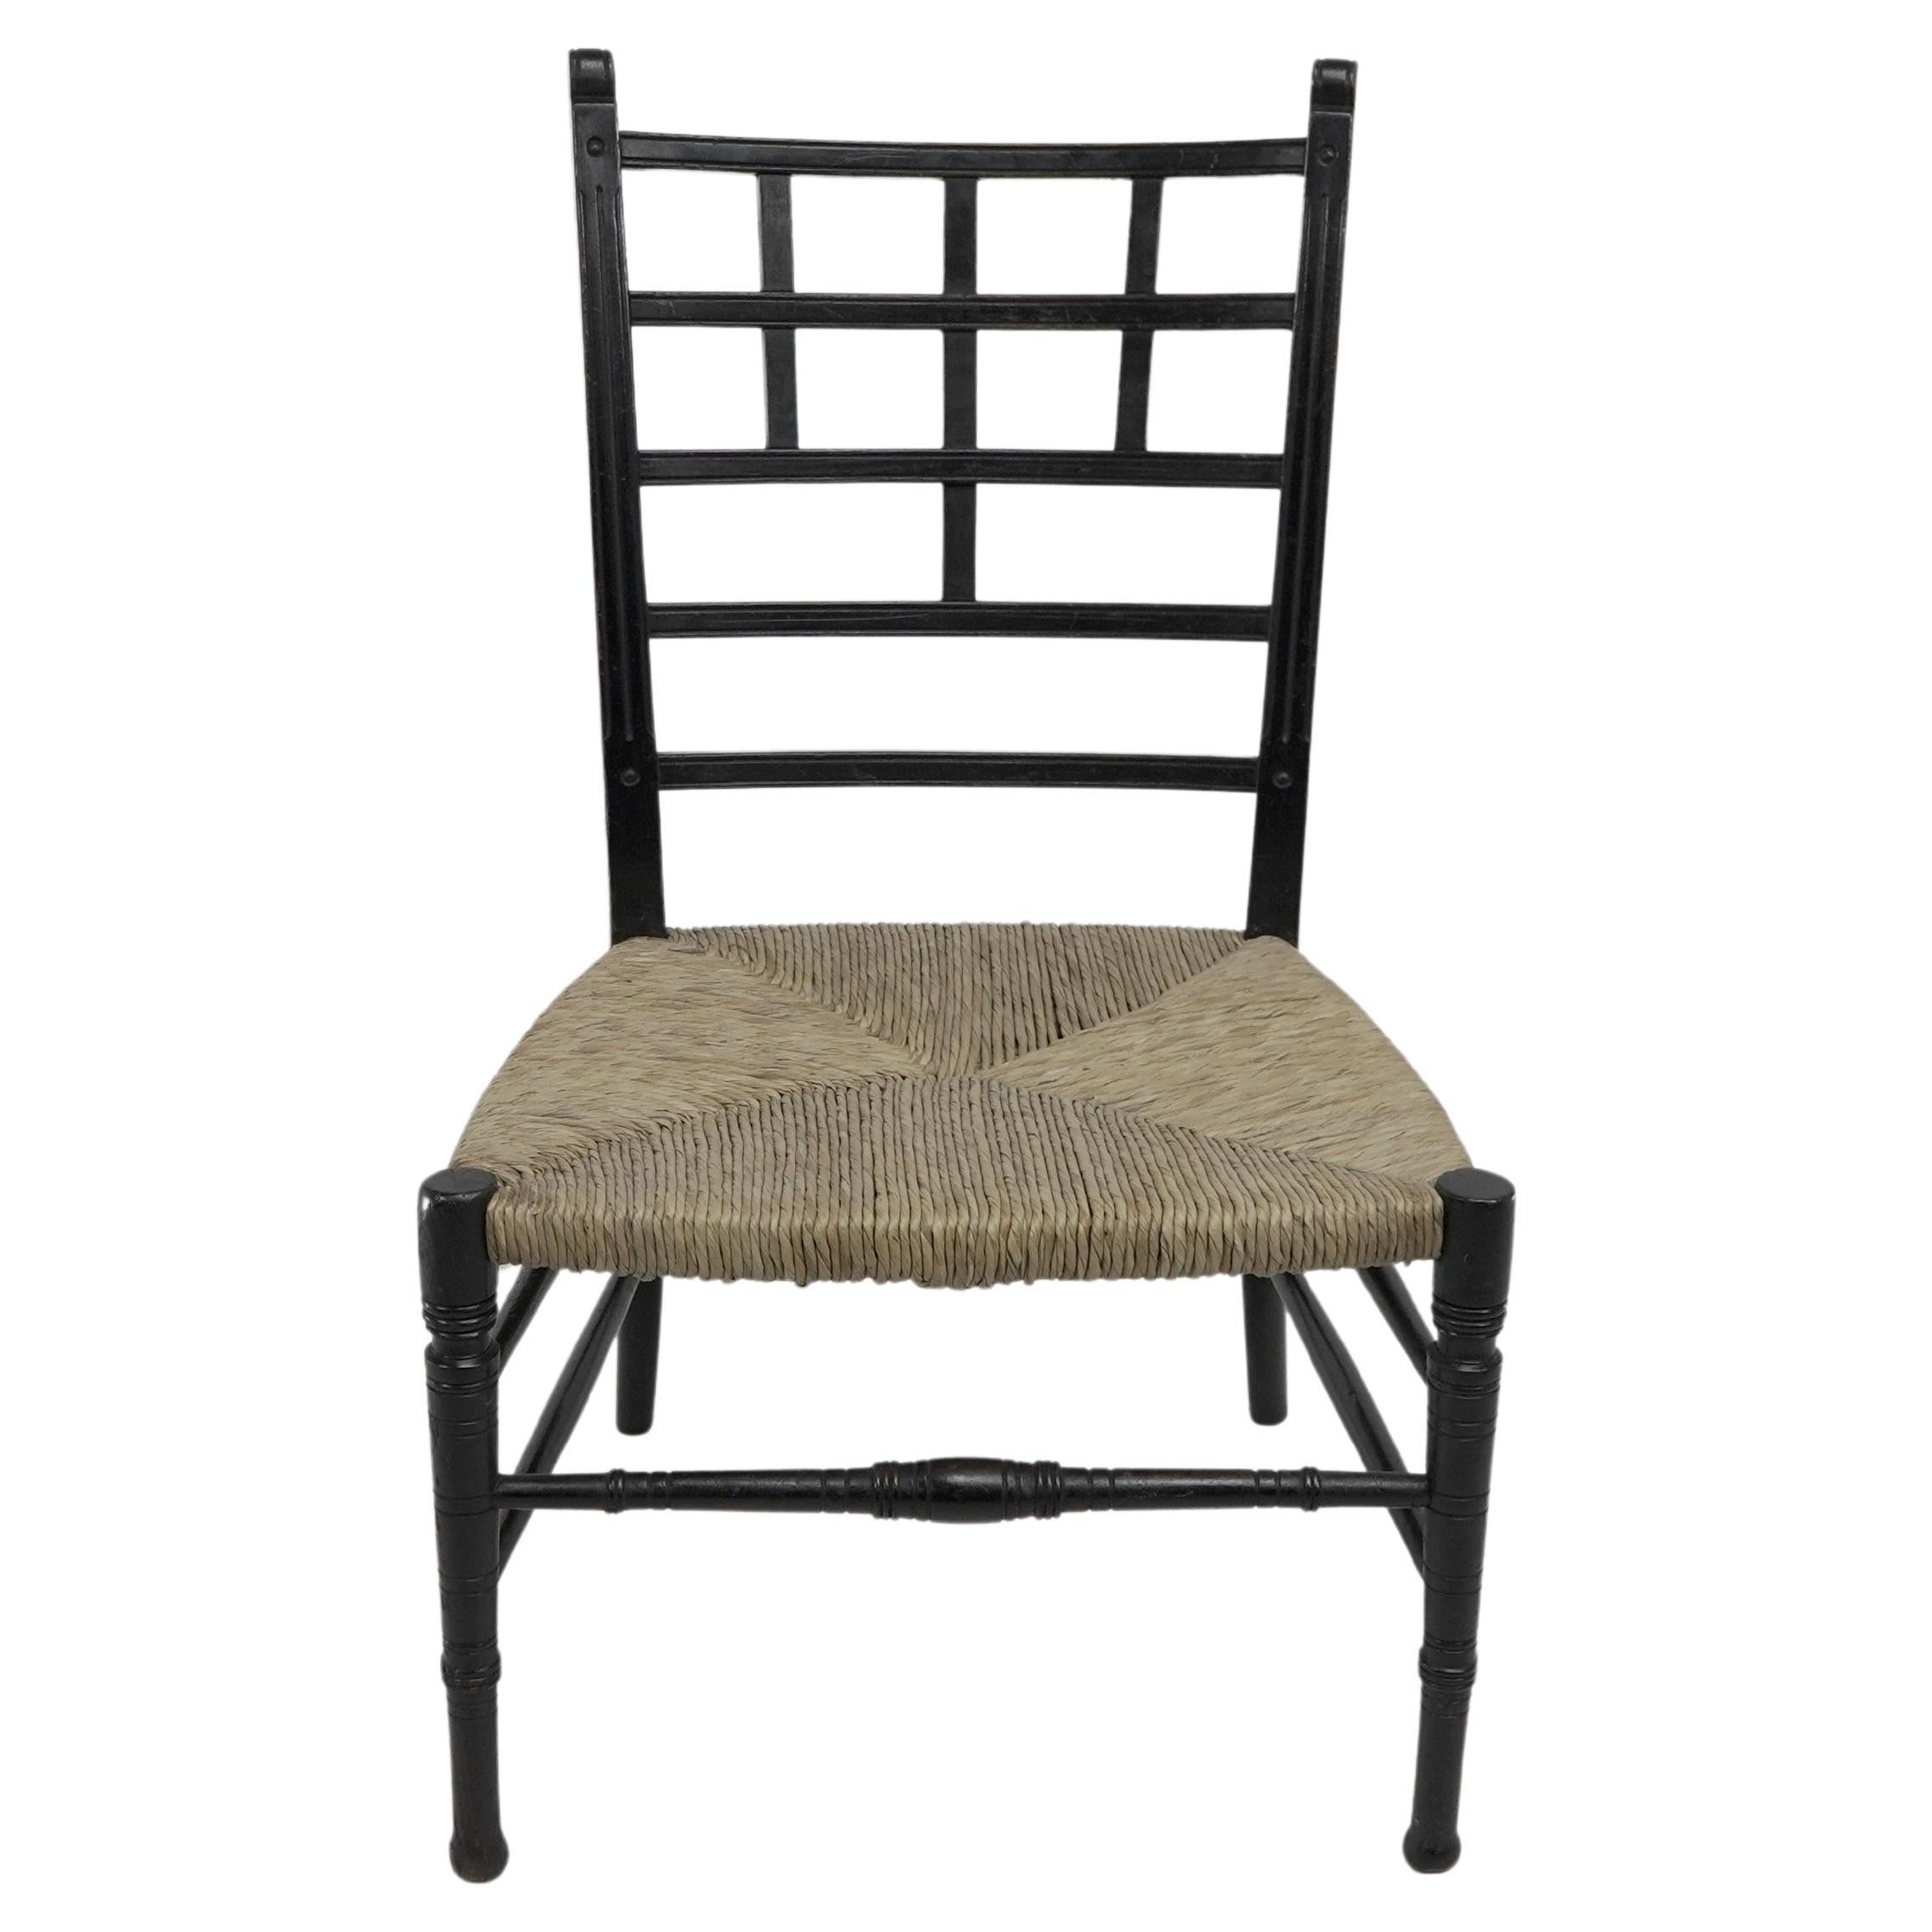 E.W. Godwin style of. An Anglo-Japanese ebonized side chair with new laid rush.
